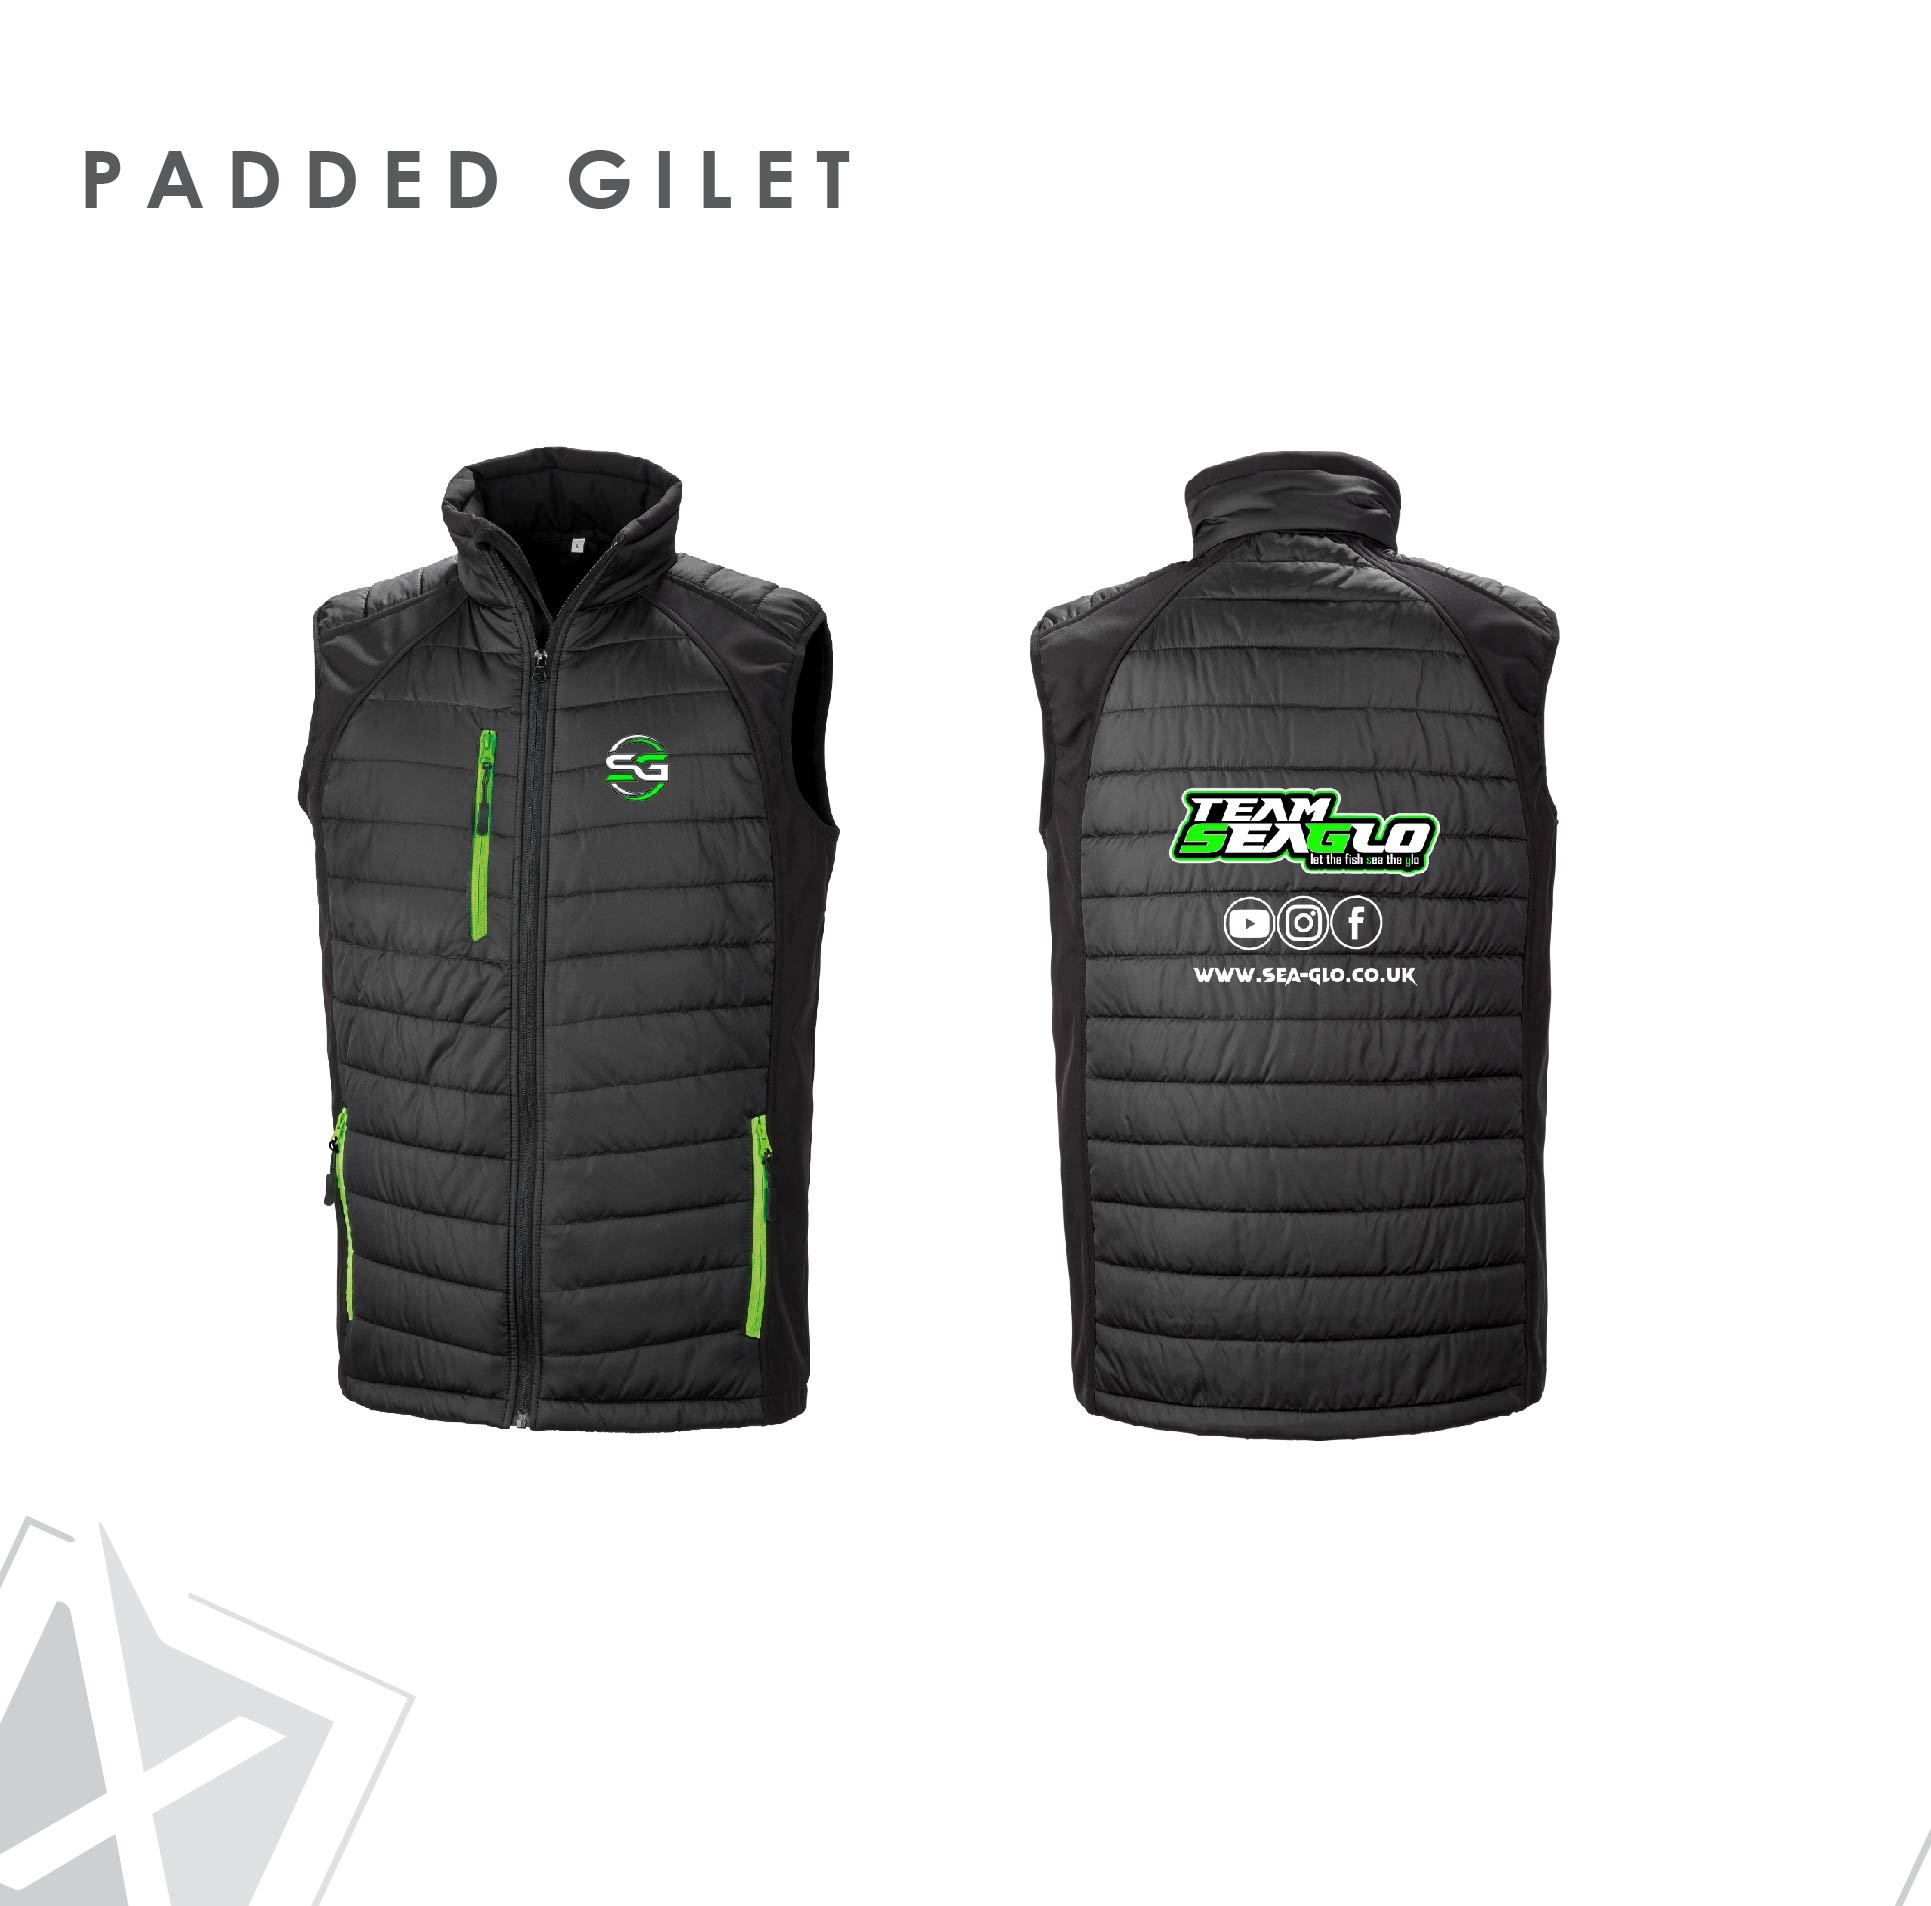 Seaglo Padded Gilet